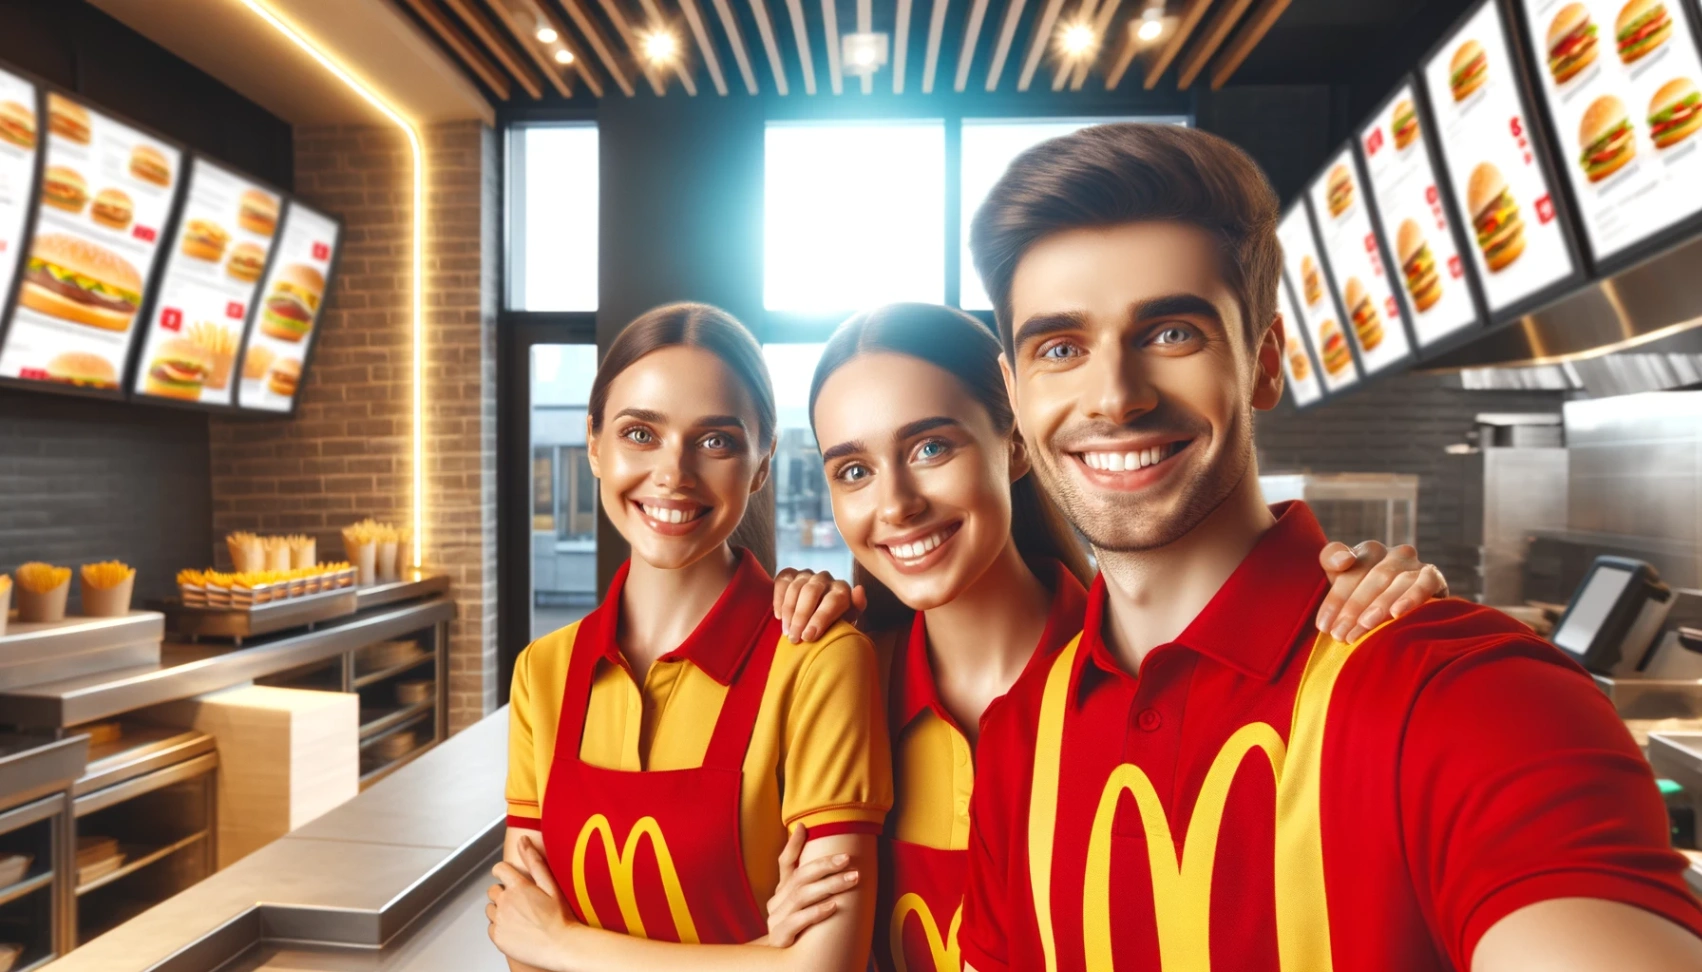 Jobs at McDonald's: How to Easily Apply Online